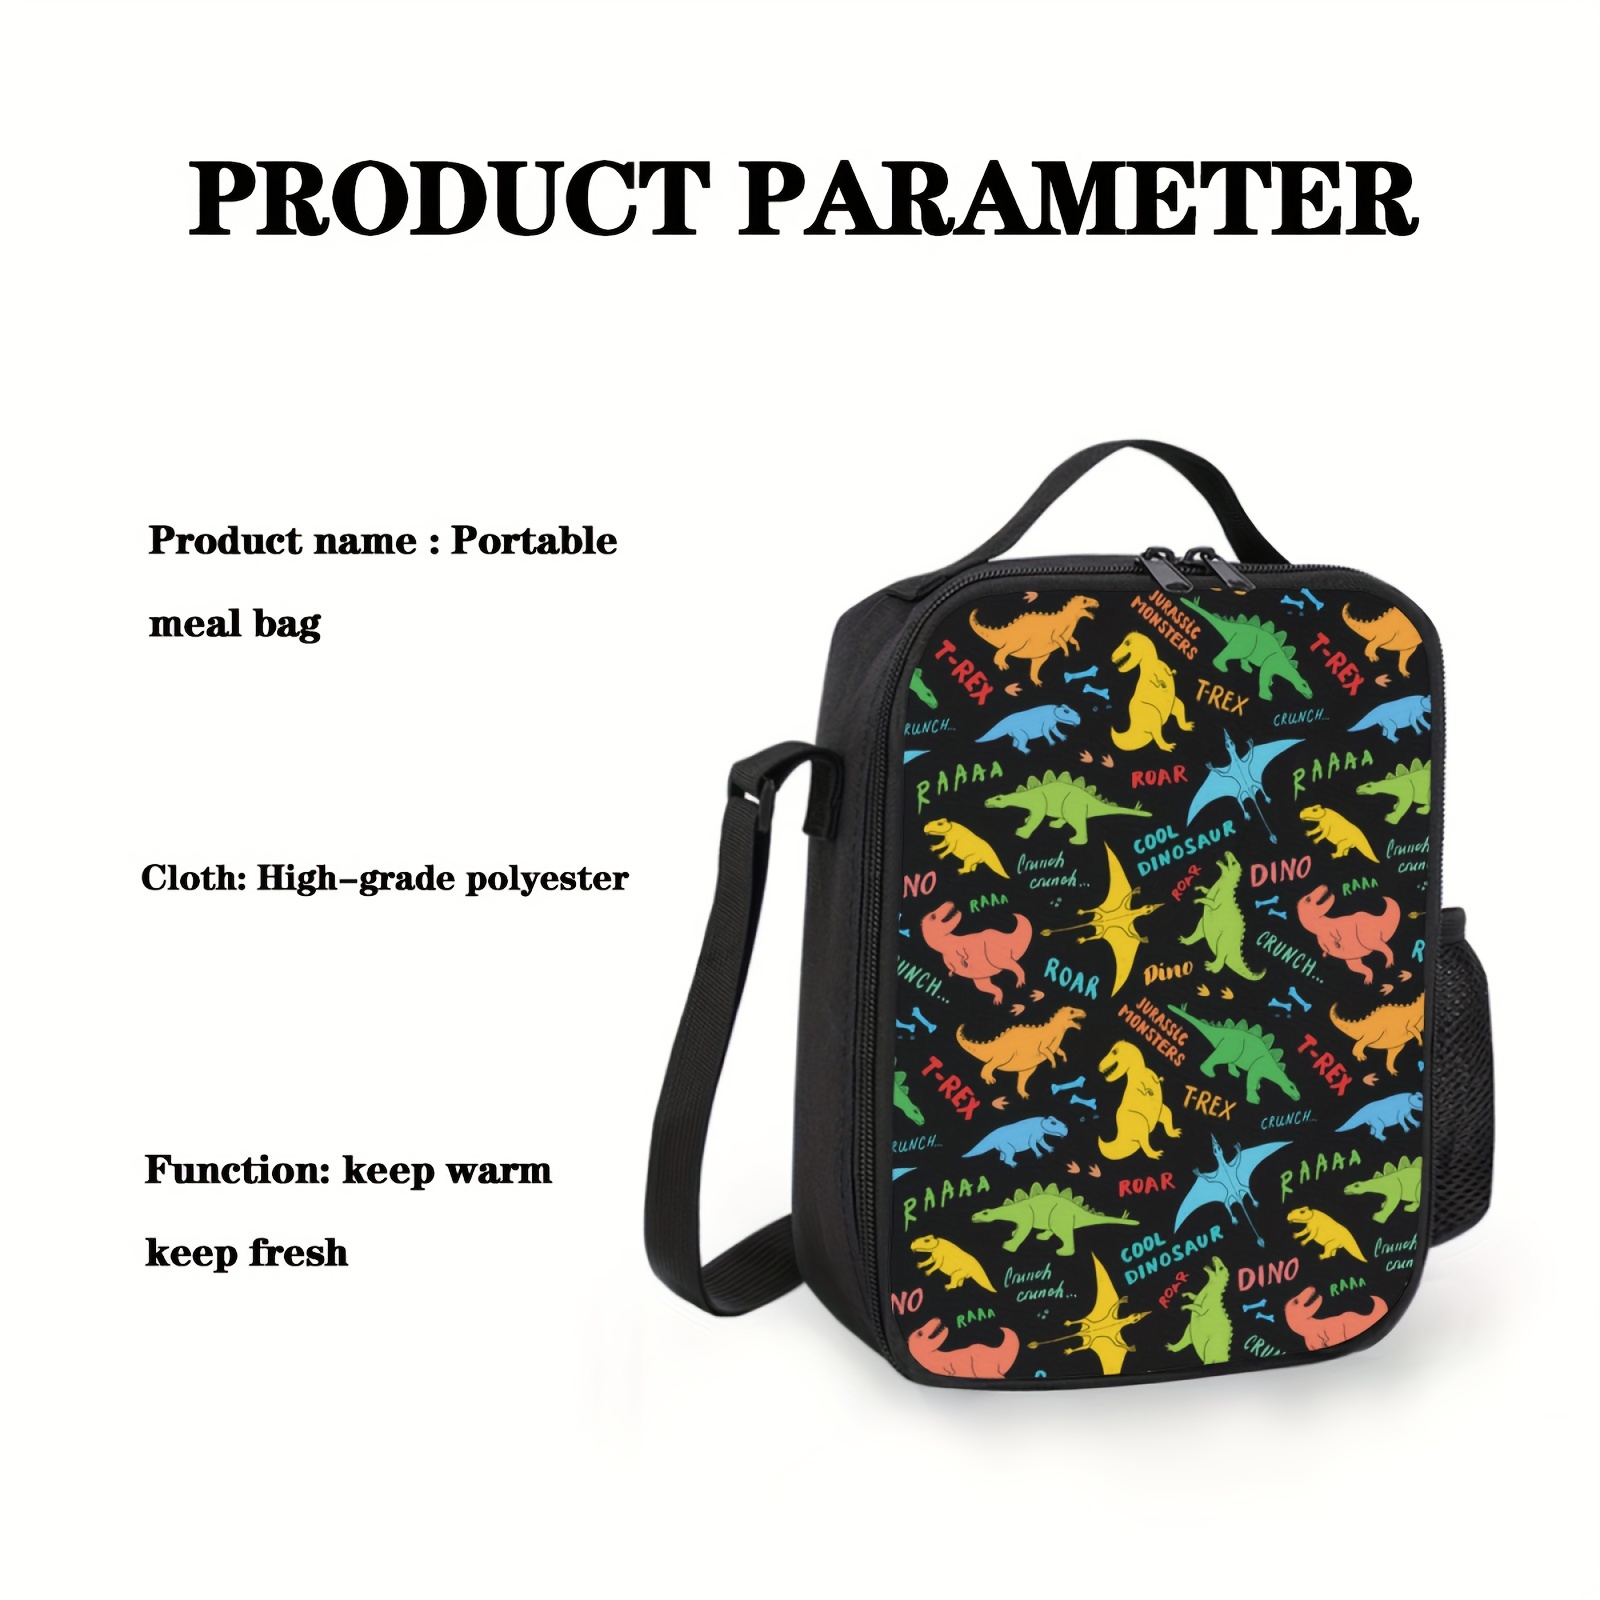 Is That The New 1pc Cartoon Dinosaur Pattern Lunch Bag ??